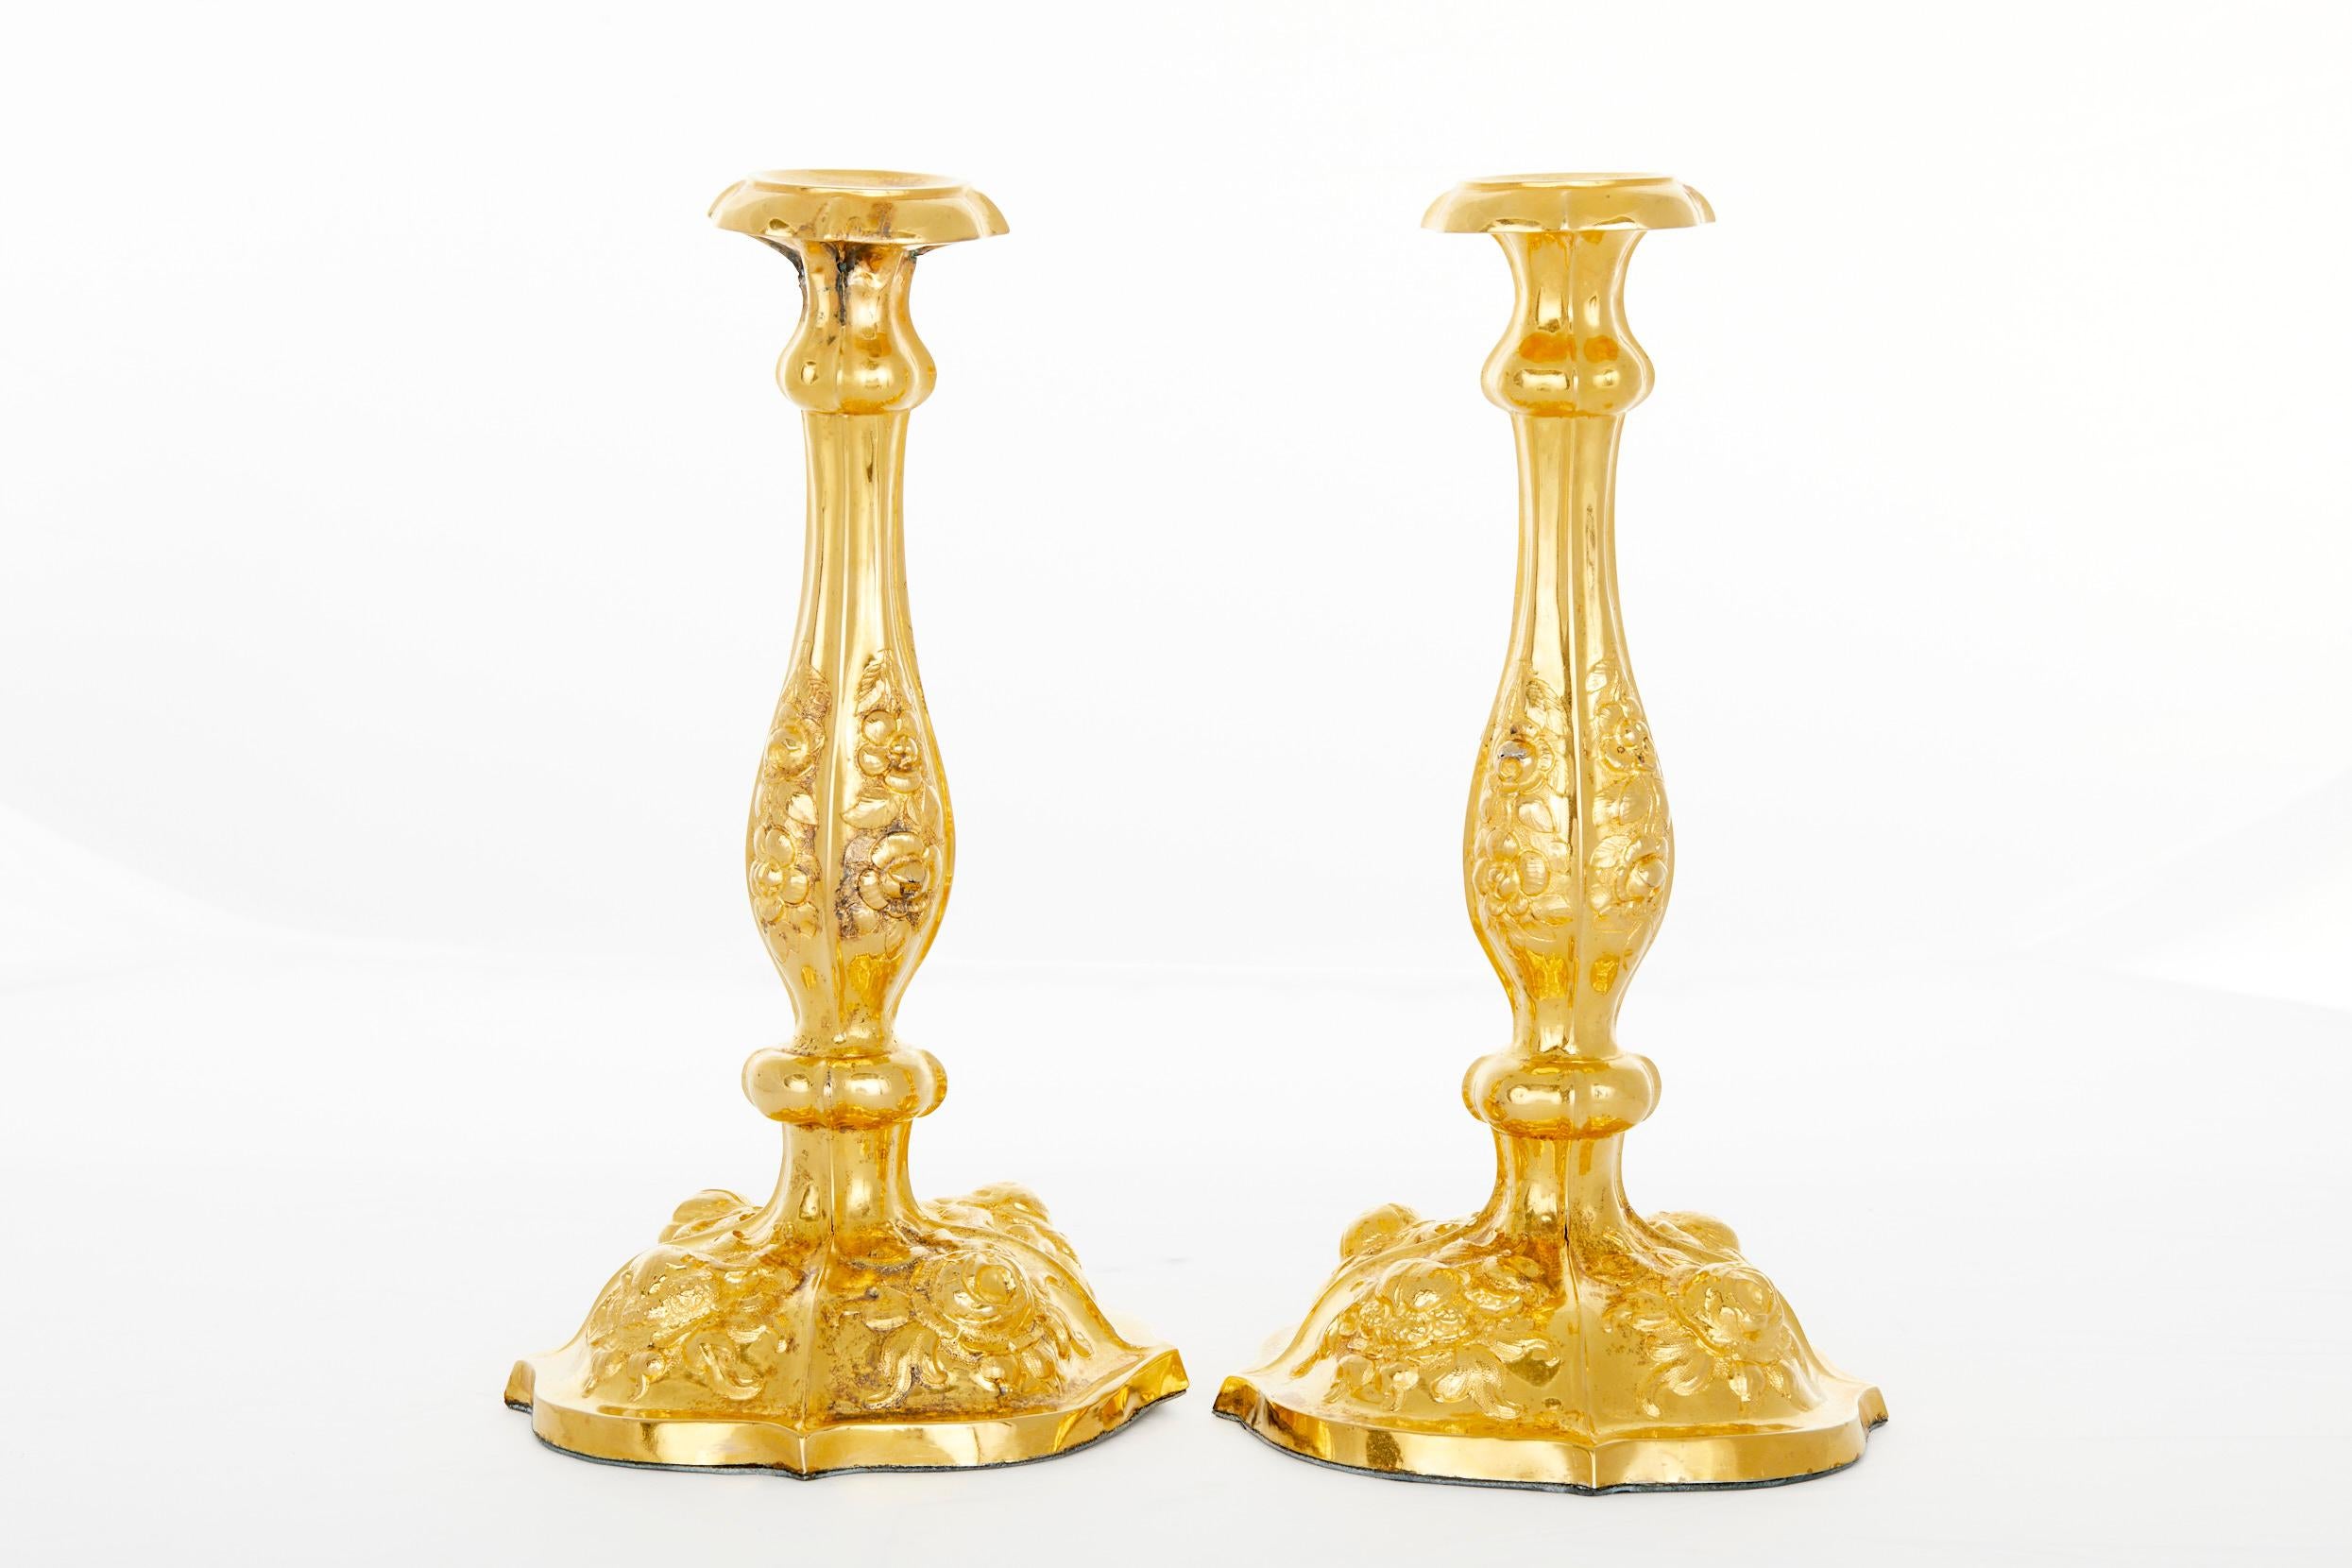 Tiffany & Co. silver gilt pair of decorative continental style tableware candlesticks with exterior floral design details. Each candlestick is in great condition. Lacking nozzles. Minor wear / oxidation to the gilding. Weighted. Maker's mark